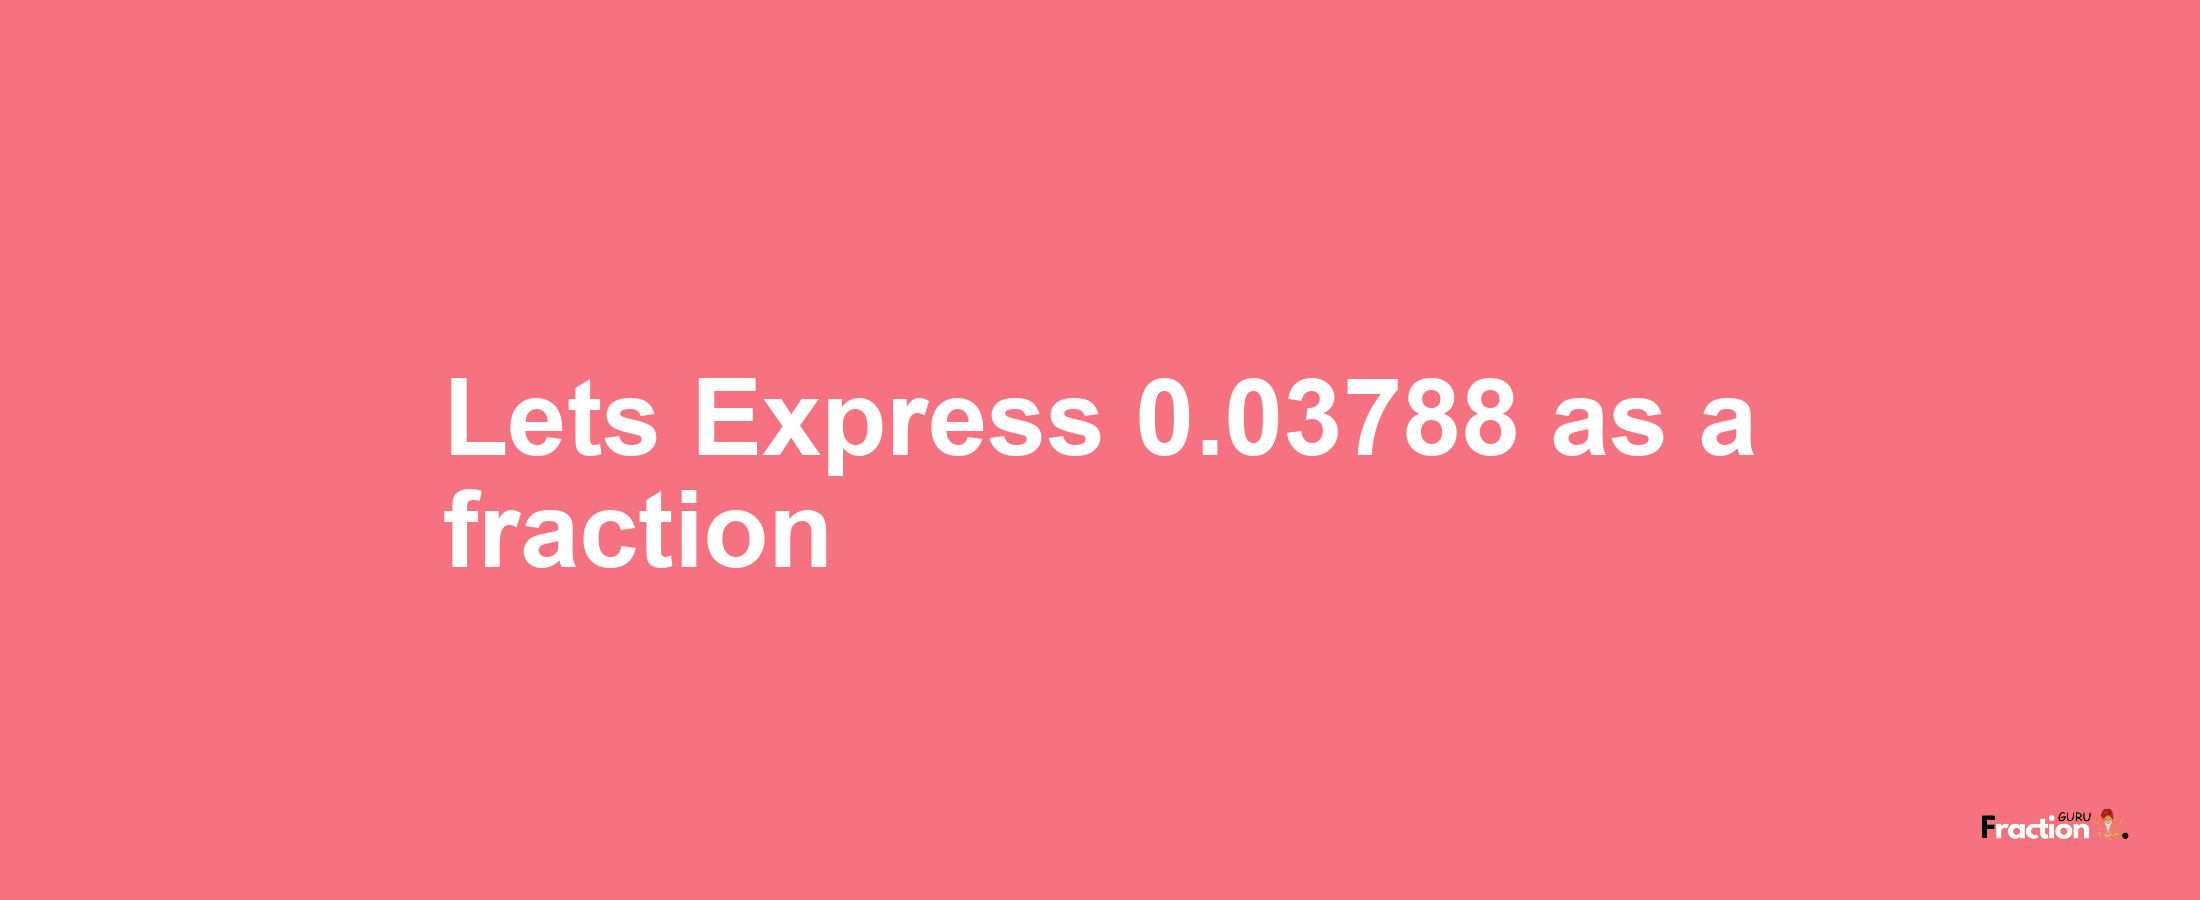 Lets Express 0.03788 as afraction